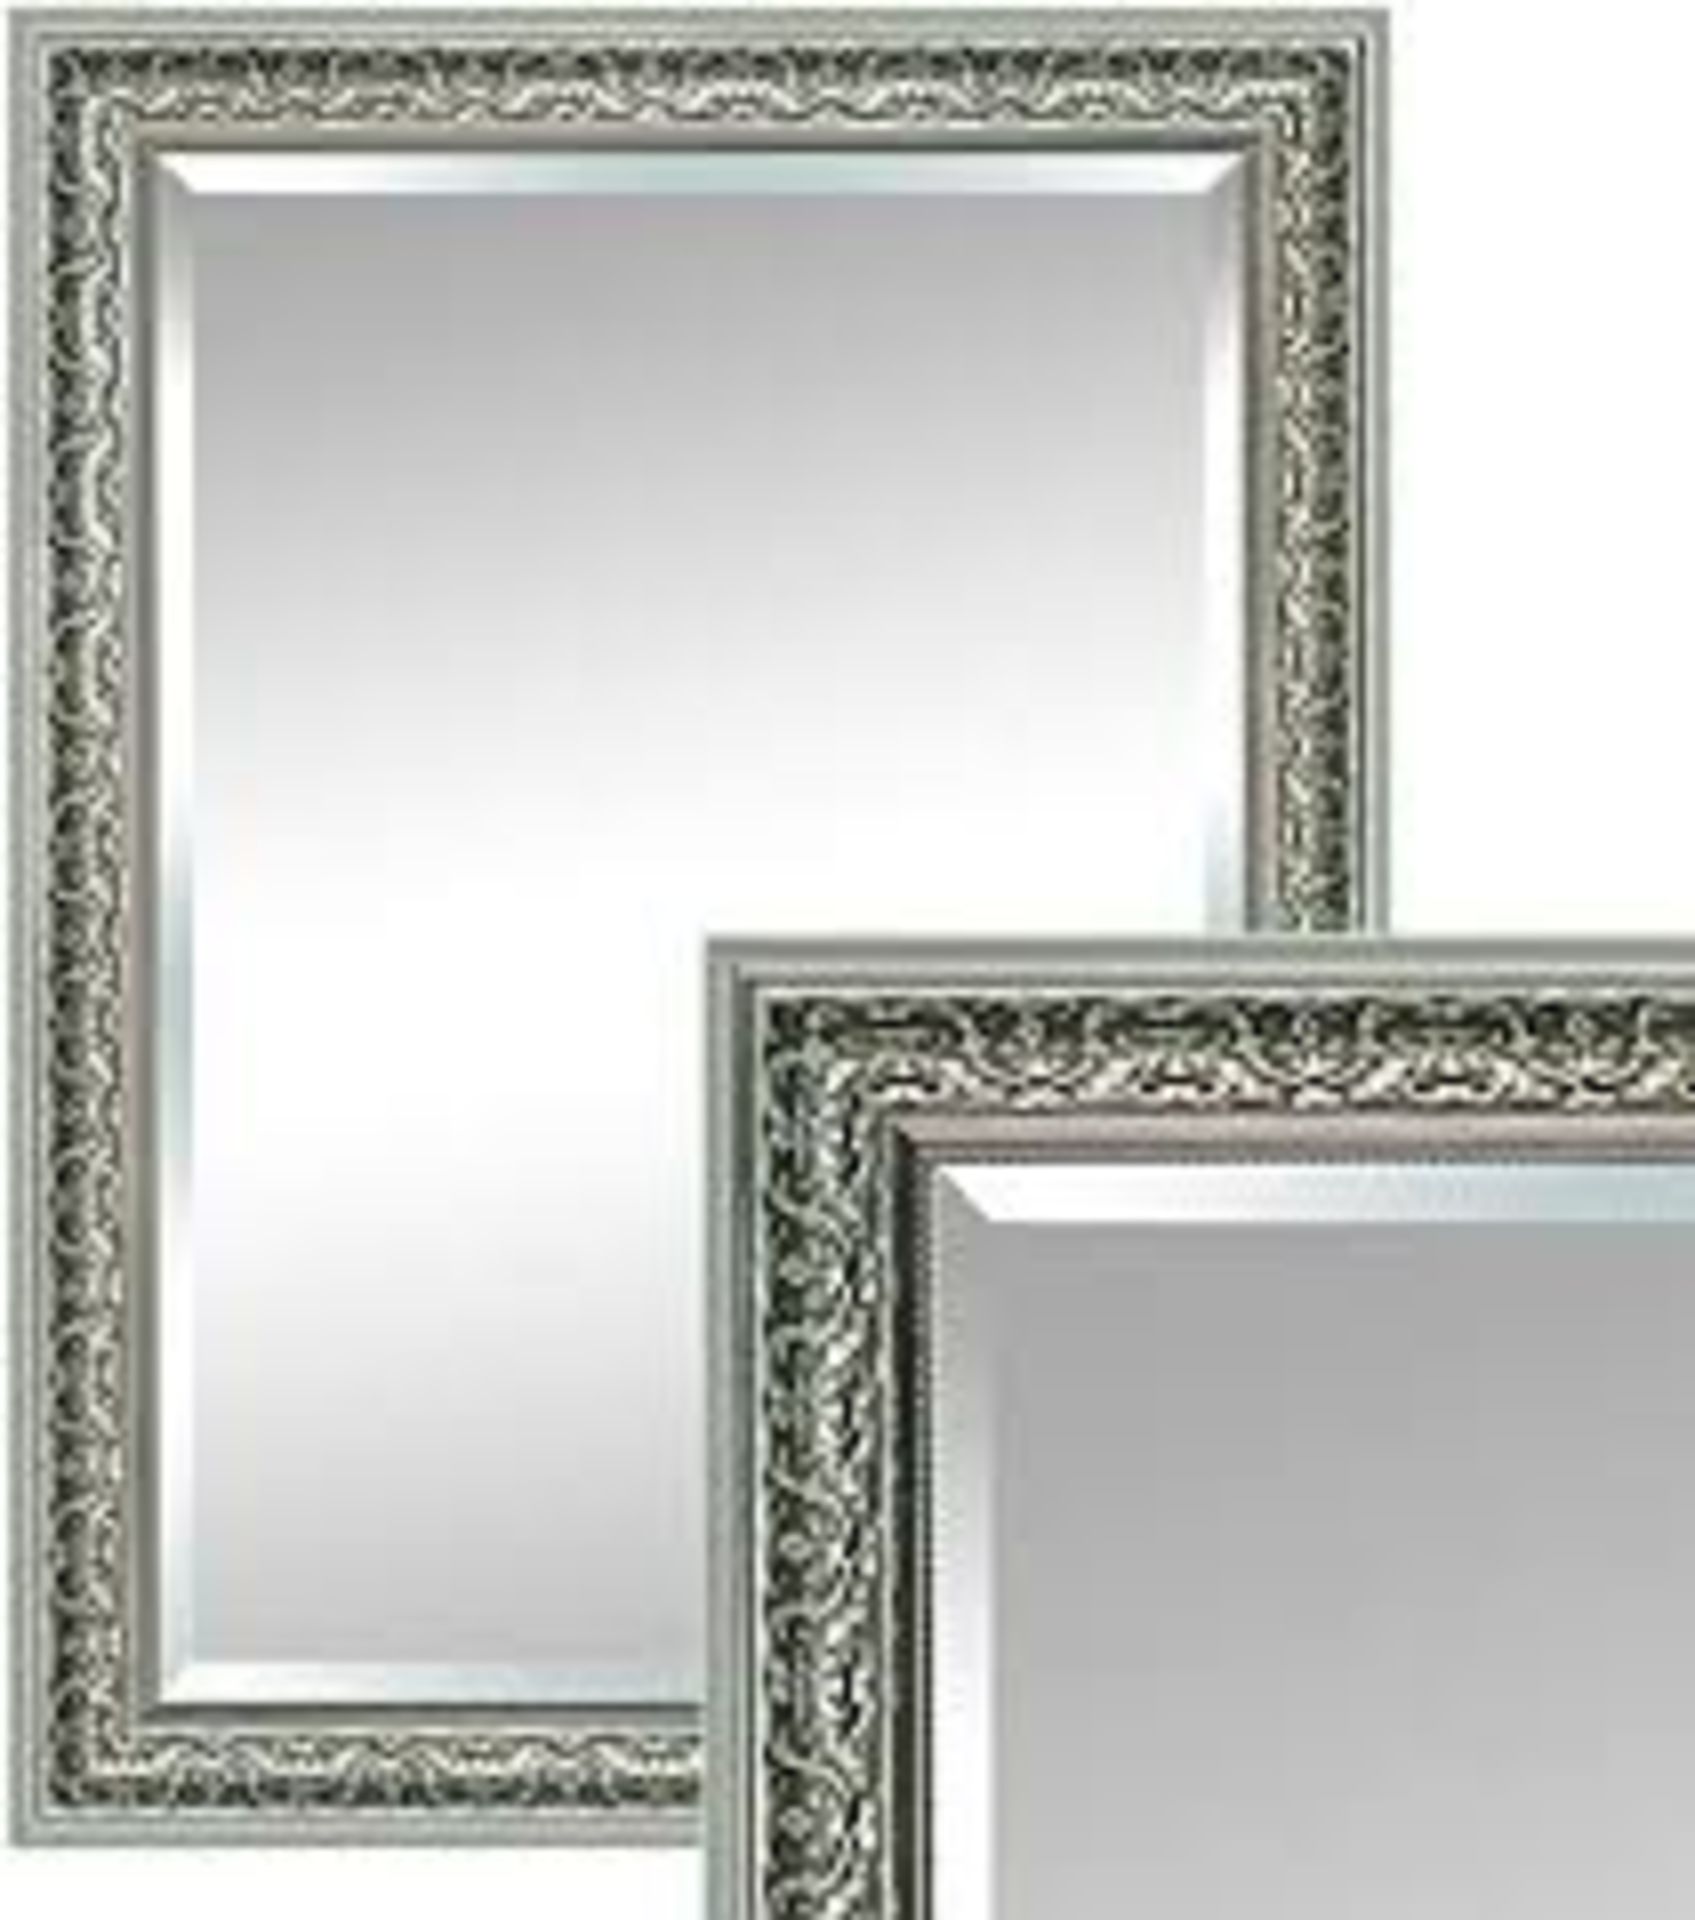 Boxed Decorative Wall Hanging Mirror RRP £65 (Pictures For Illustration Purposes Only) (Appraisals